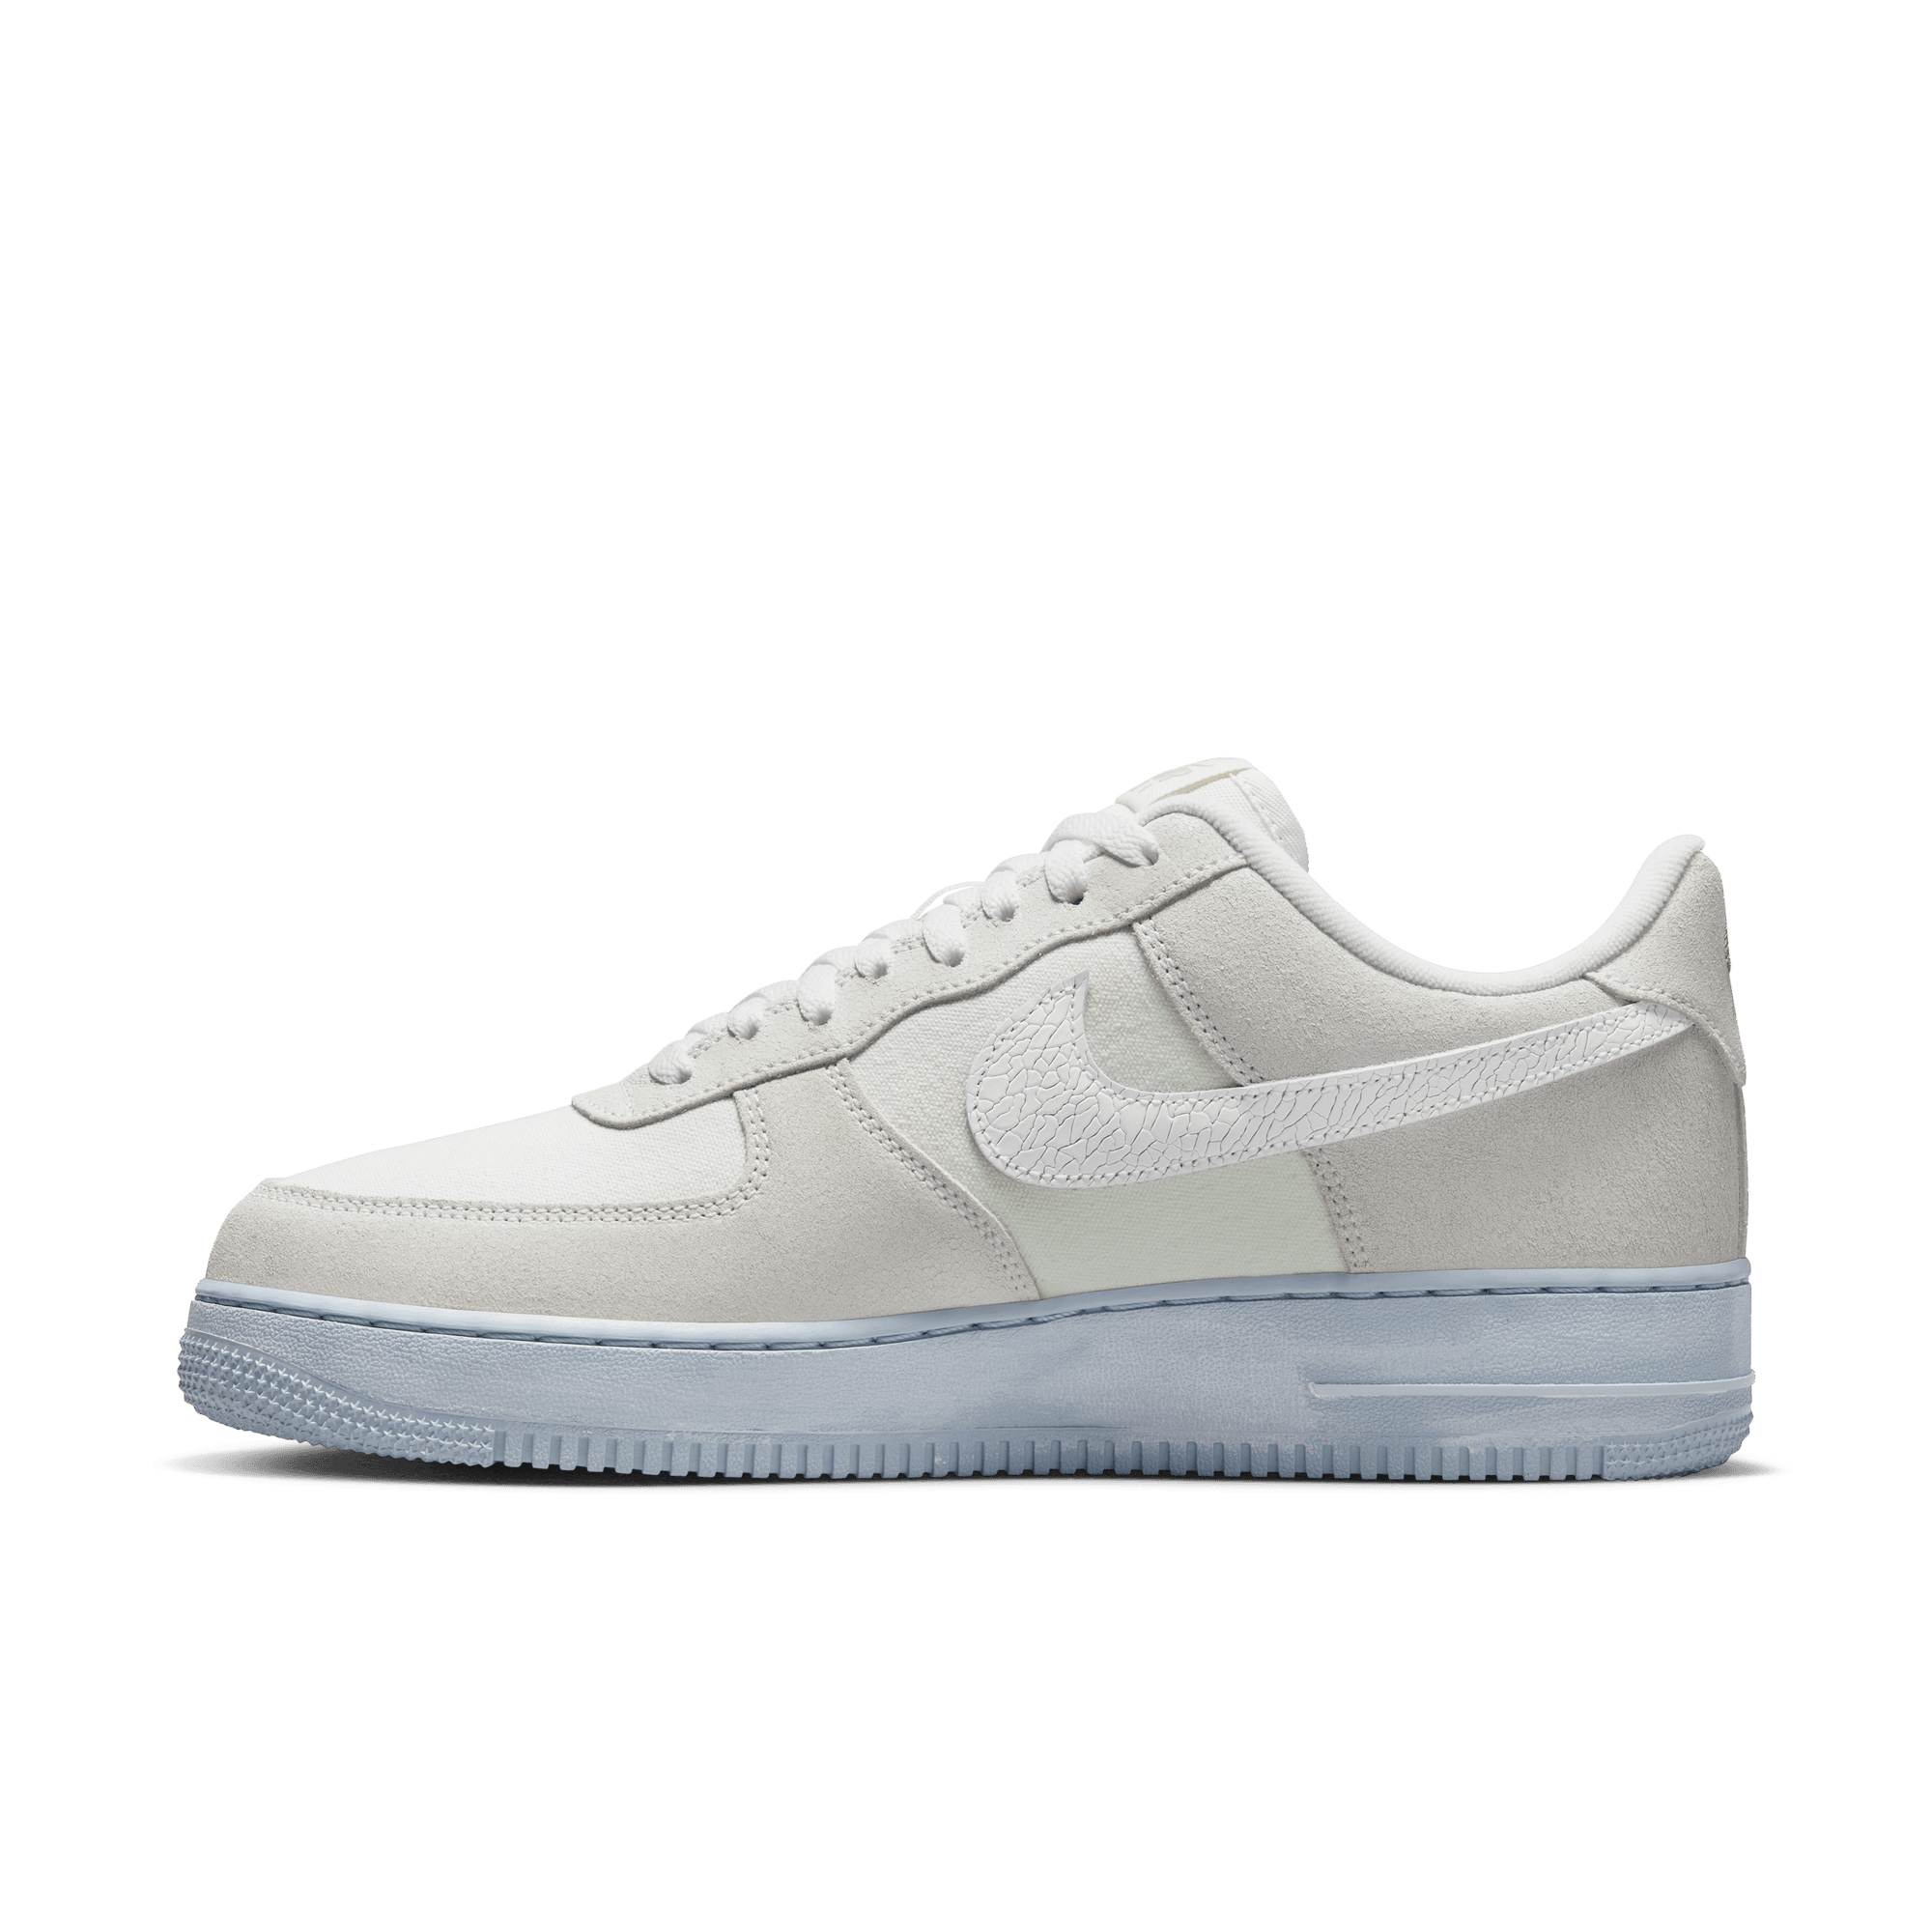 Nike Air Force 1 High '07 LV8 Emb Casual Shoes